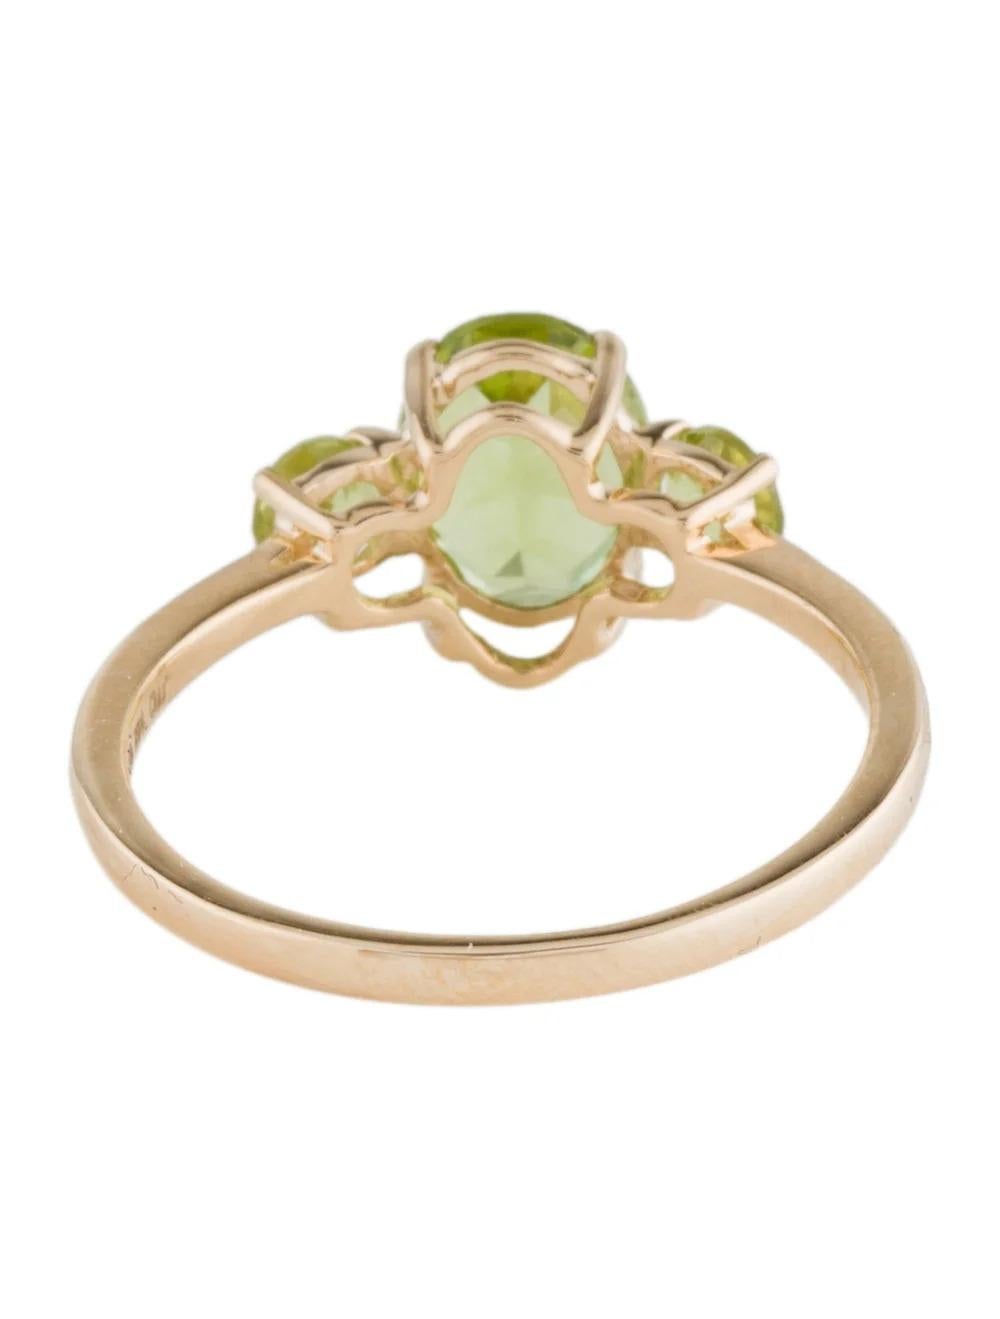 14K Yellow Gold Peridot Cocktail Ring, Size 7: Vibrant Green Gemstone Jewelry In New Condition For Sale In Holtsville, NY